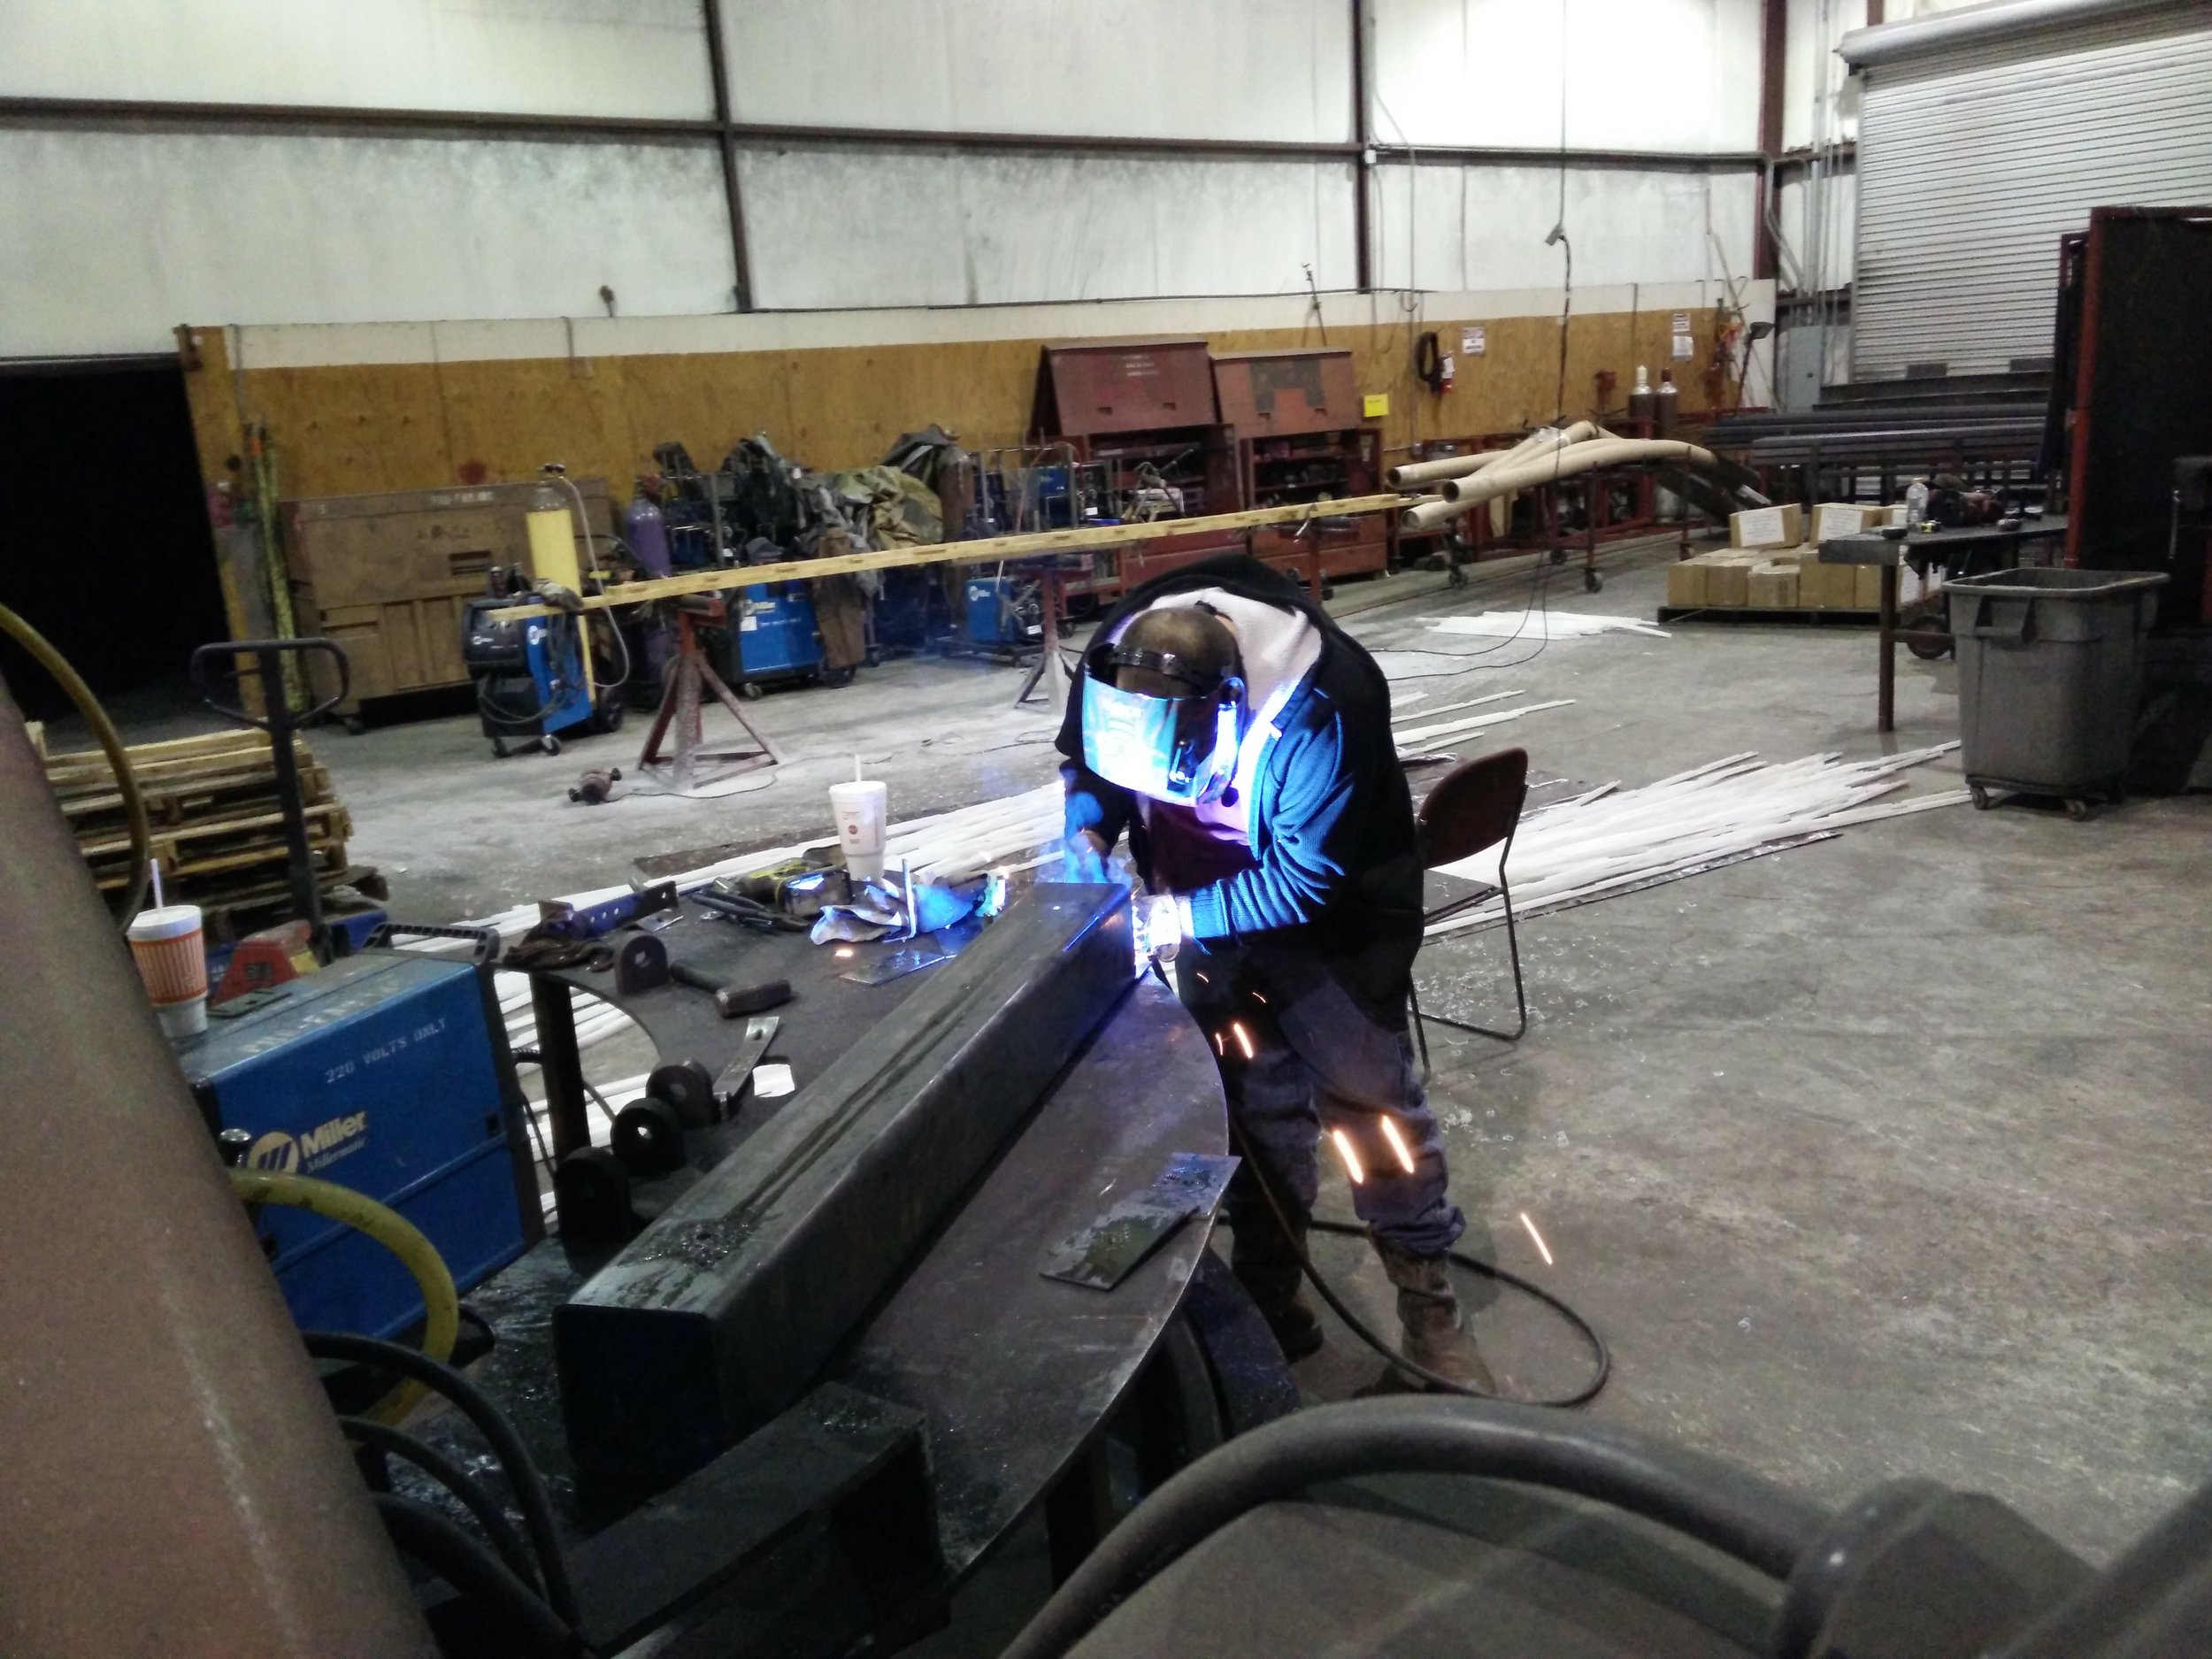 Welding footplates on the stands